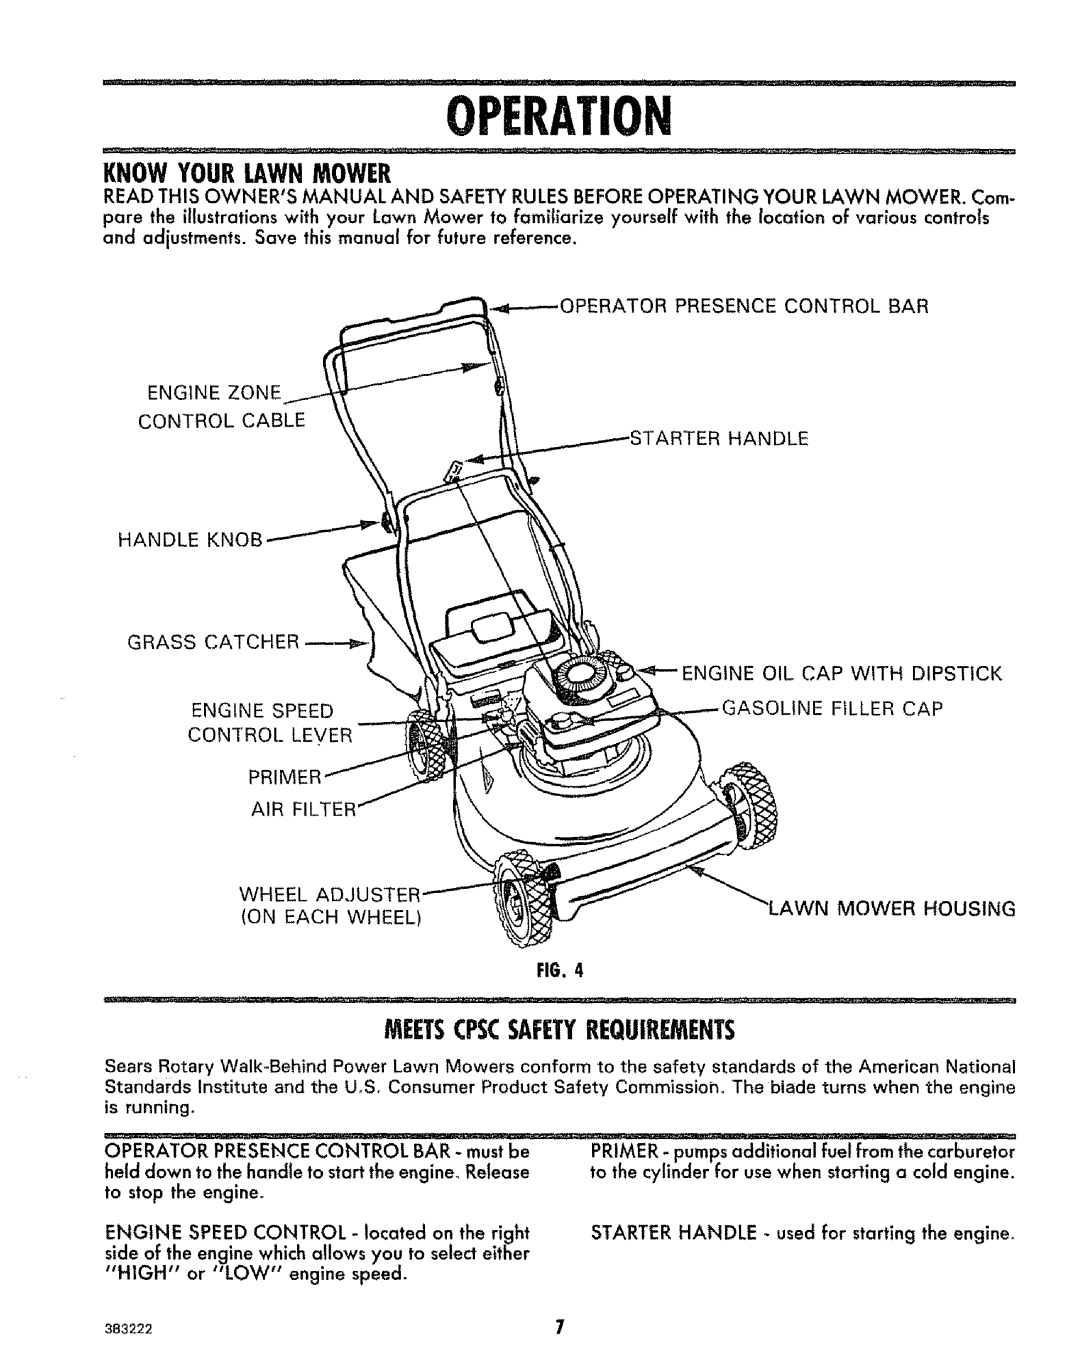 Sears 917.383223 manual Operation, Knowyourlawnmower, Meetscpscsafetyrequirements 